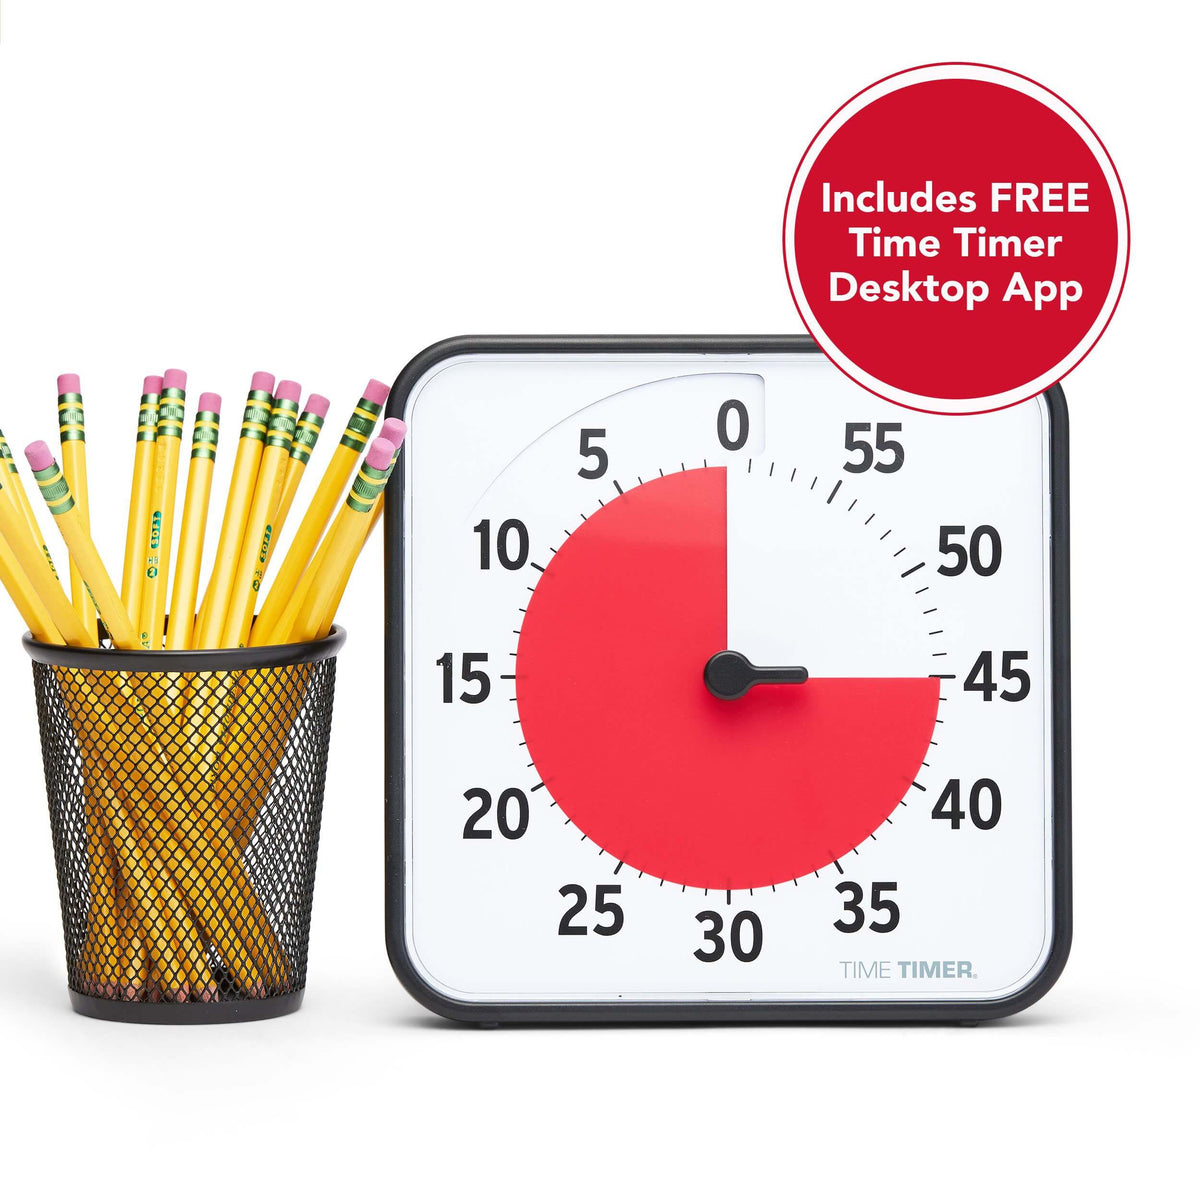 Time Timer 8 New And Improved with highlight sticker showing includes free time timer desktop app